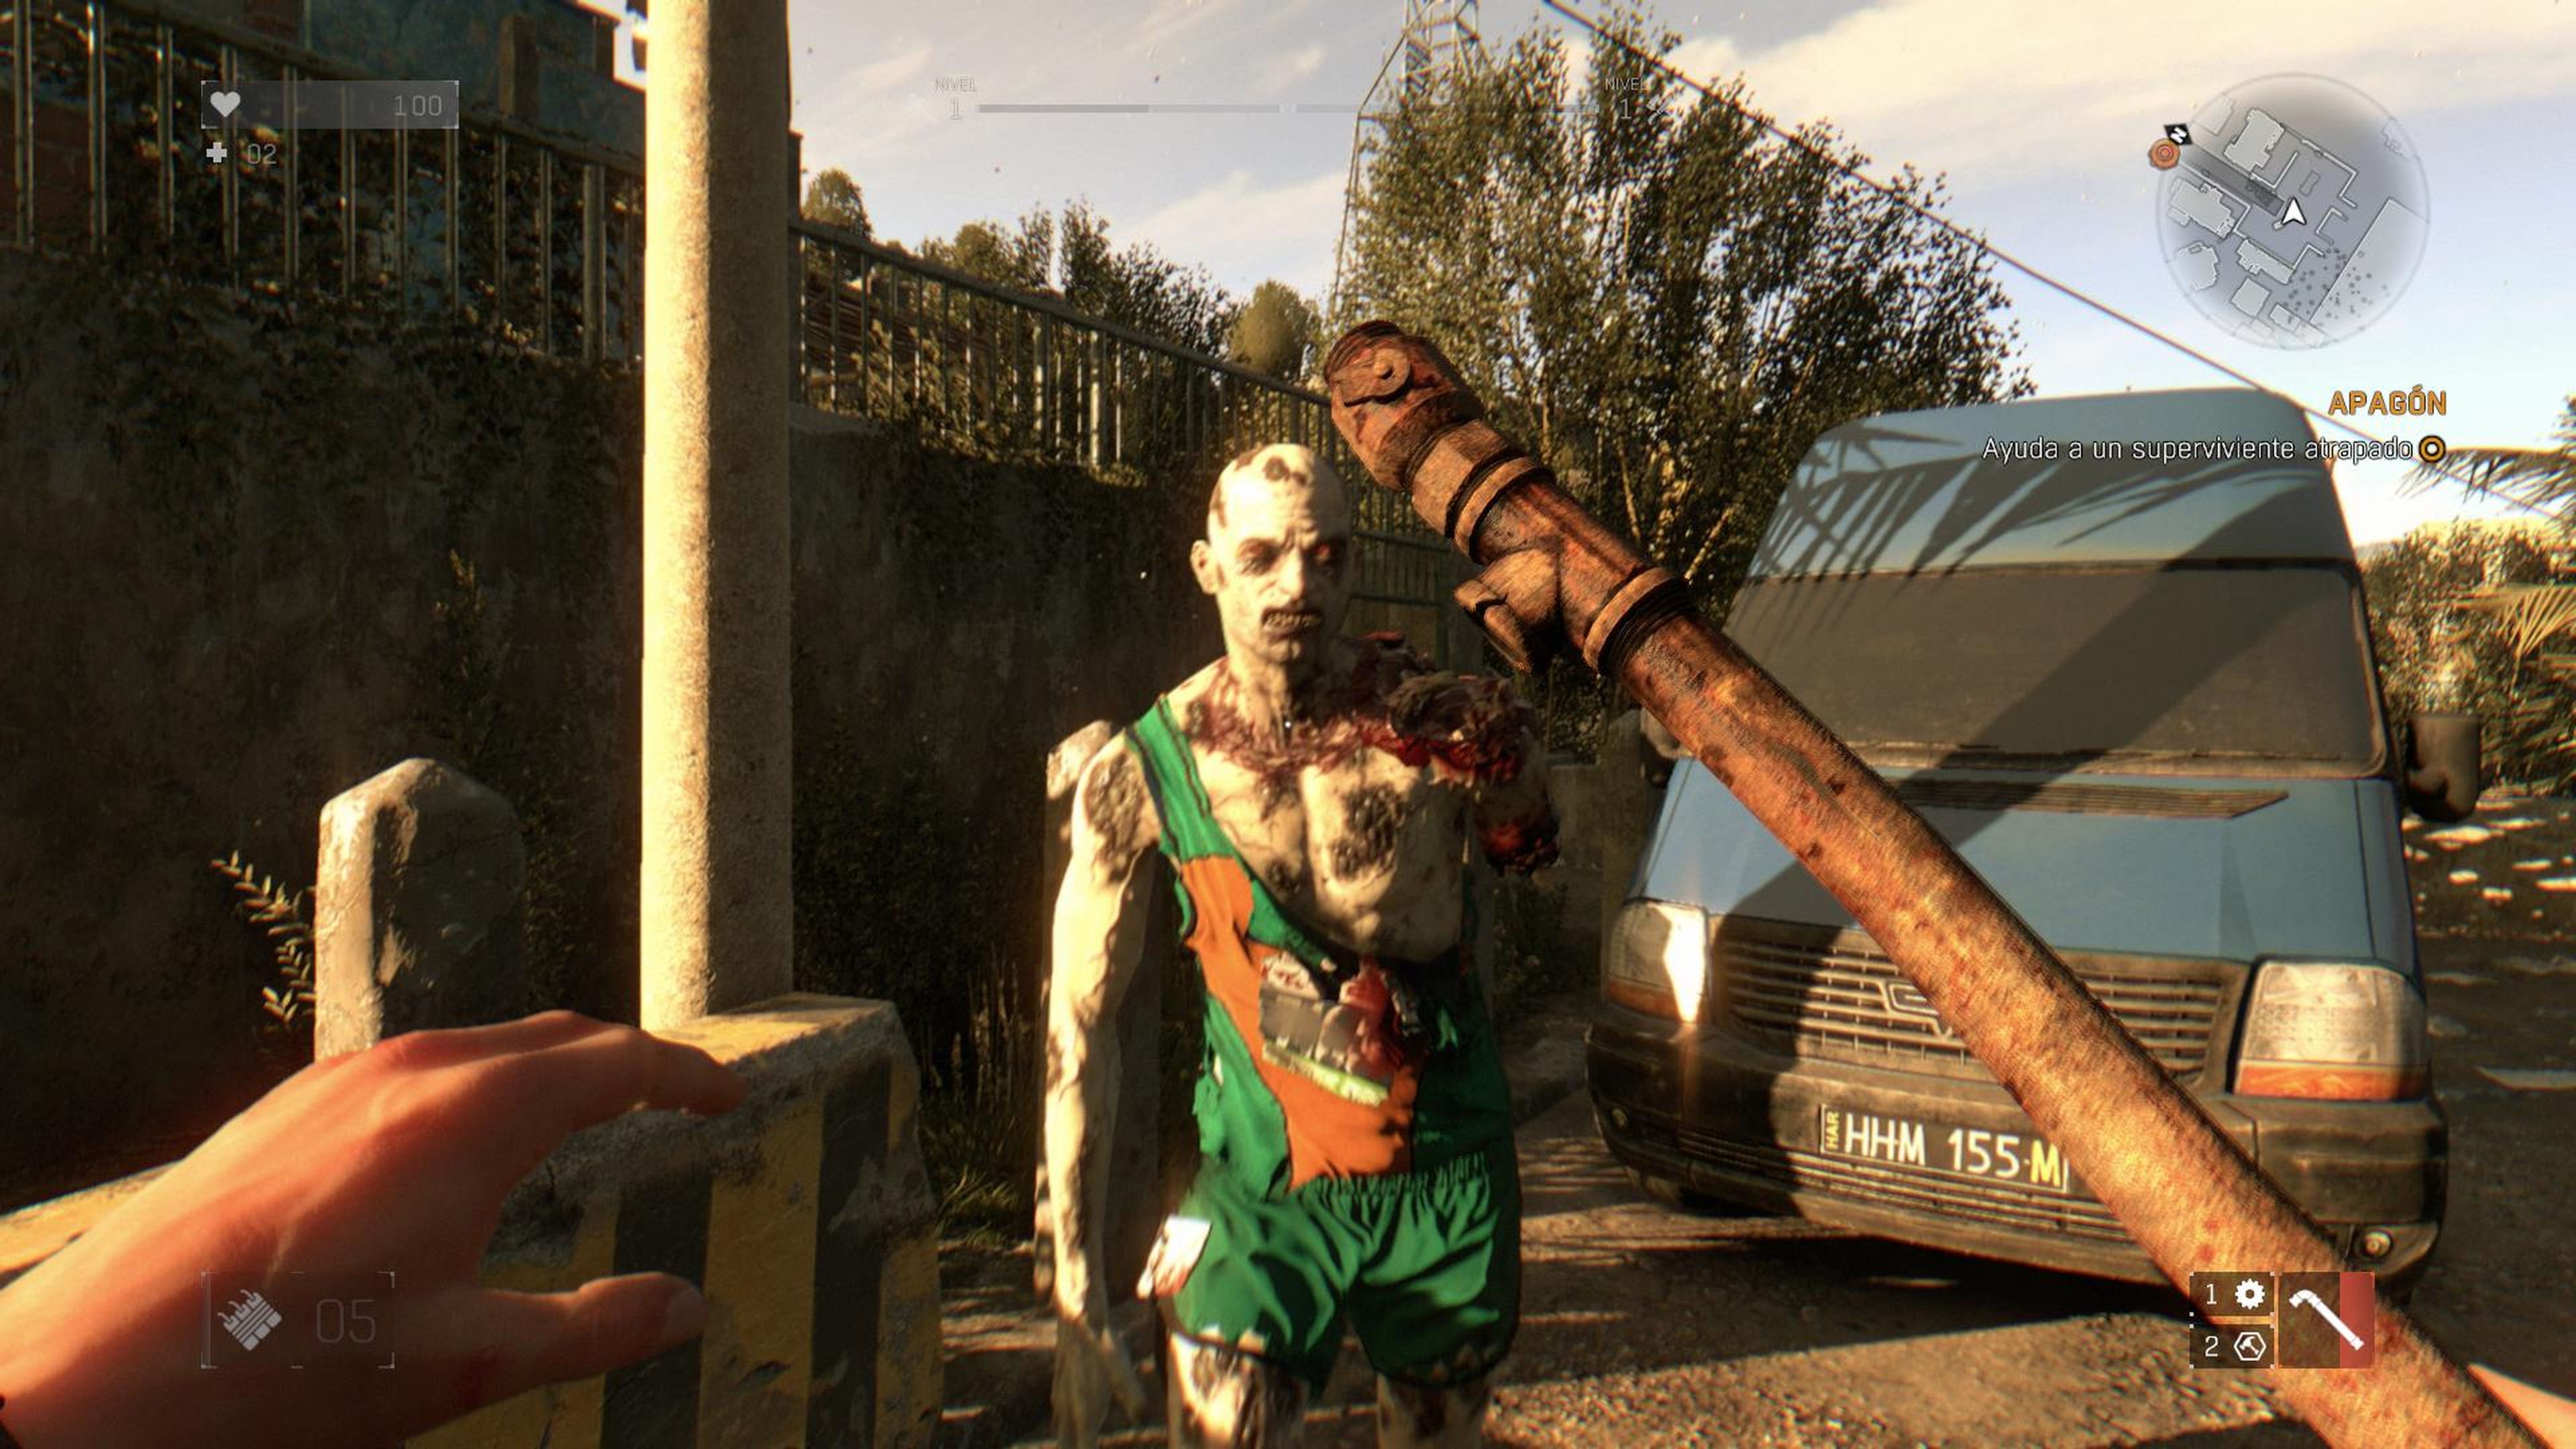 Avance de Dying Light para PS4, Xbox One y PC